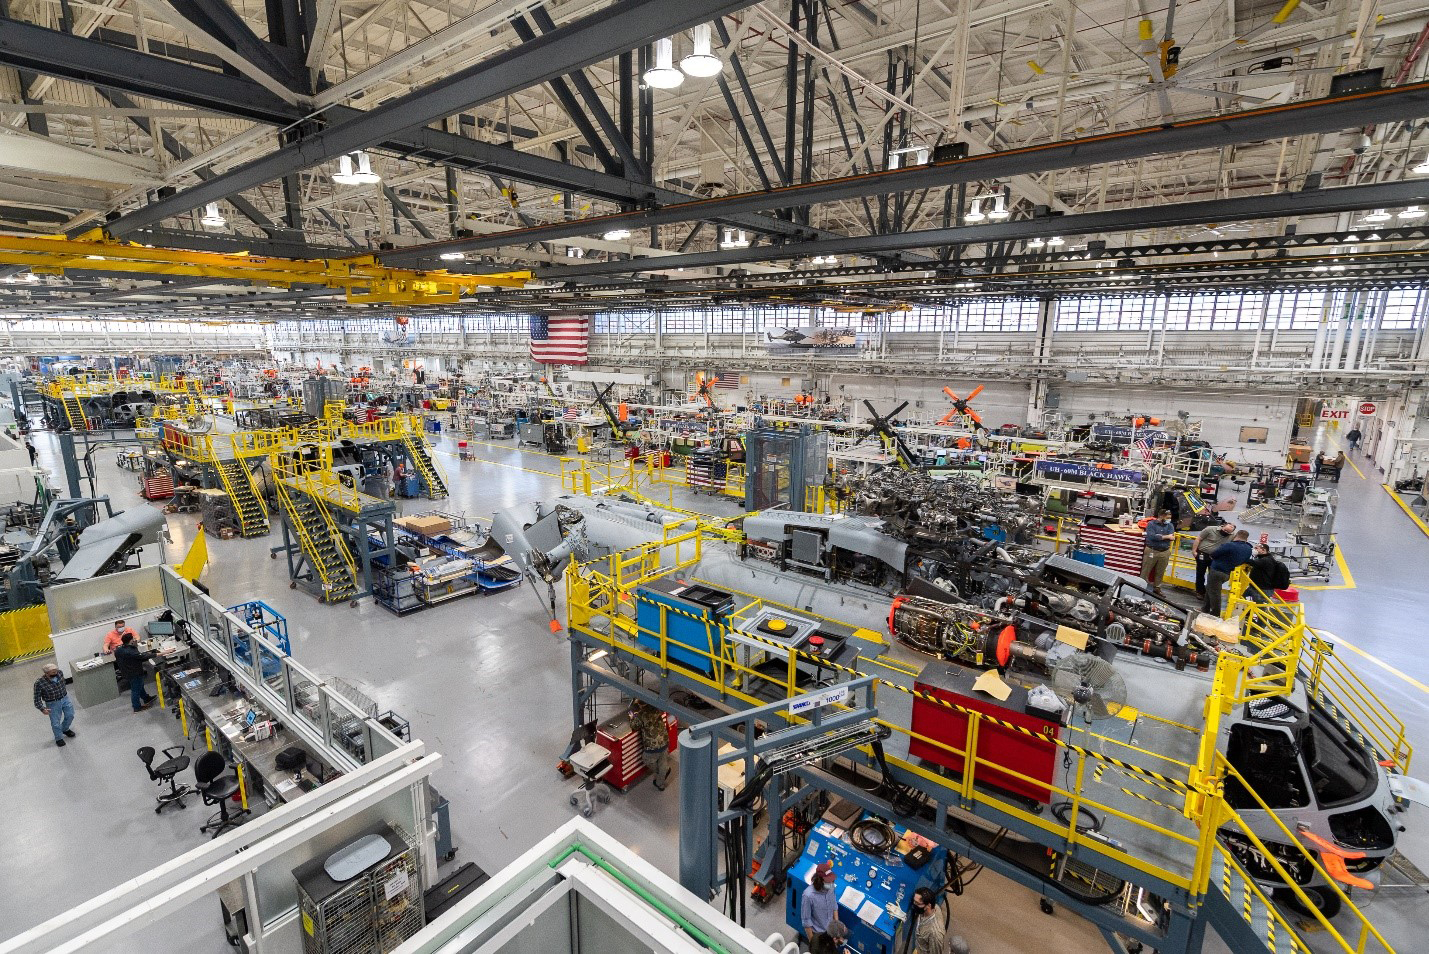 Overhead view of the production line at Sikorsky’s Stratford, Connecticut factory. Photo courtesy of Lockheed Martin.